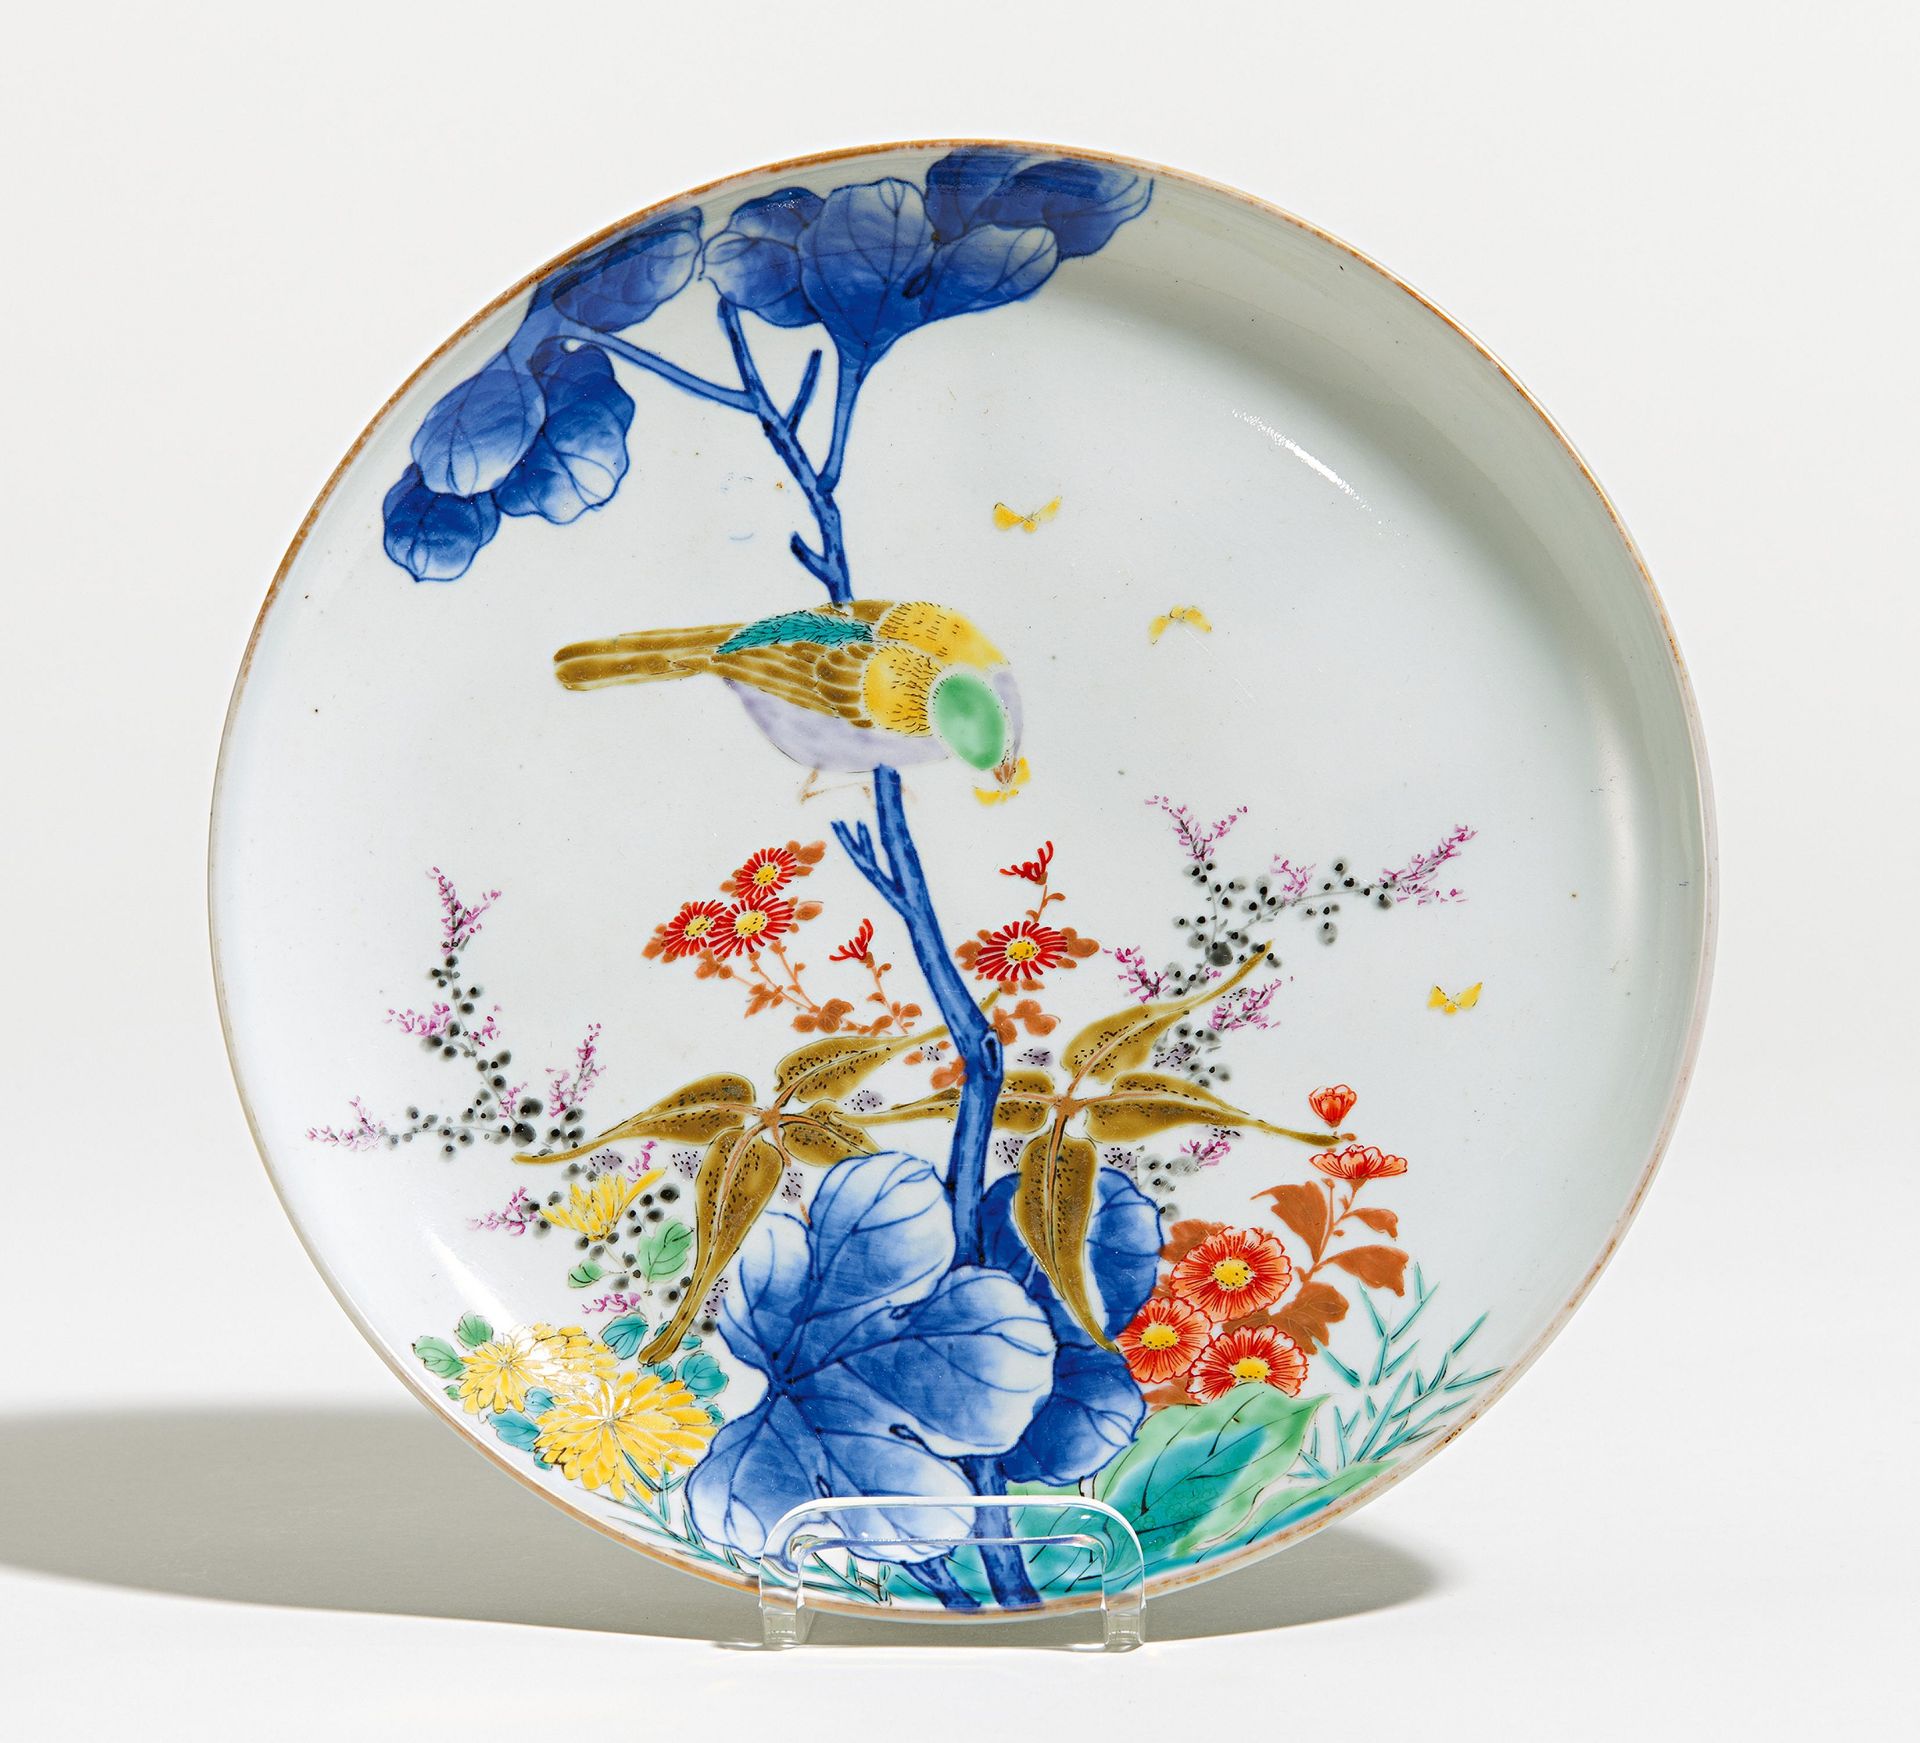 DISH WITH SONGBIRD AND FLOWERS. Origin: Japan. Date: 19th-20th c. Technique: Kakiemon porcelain